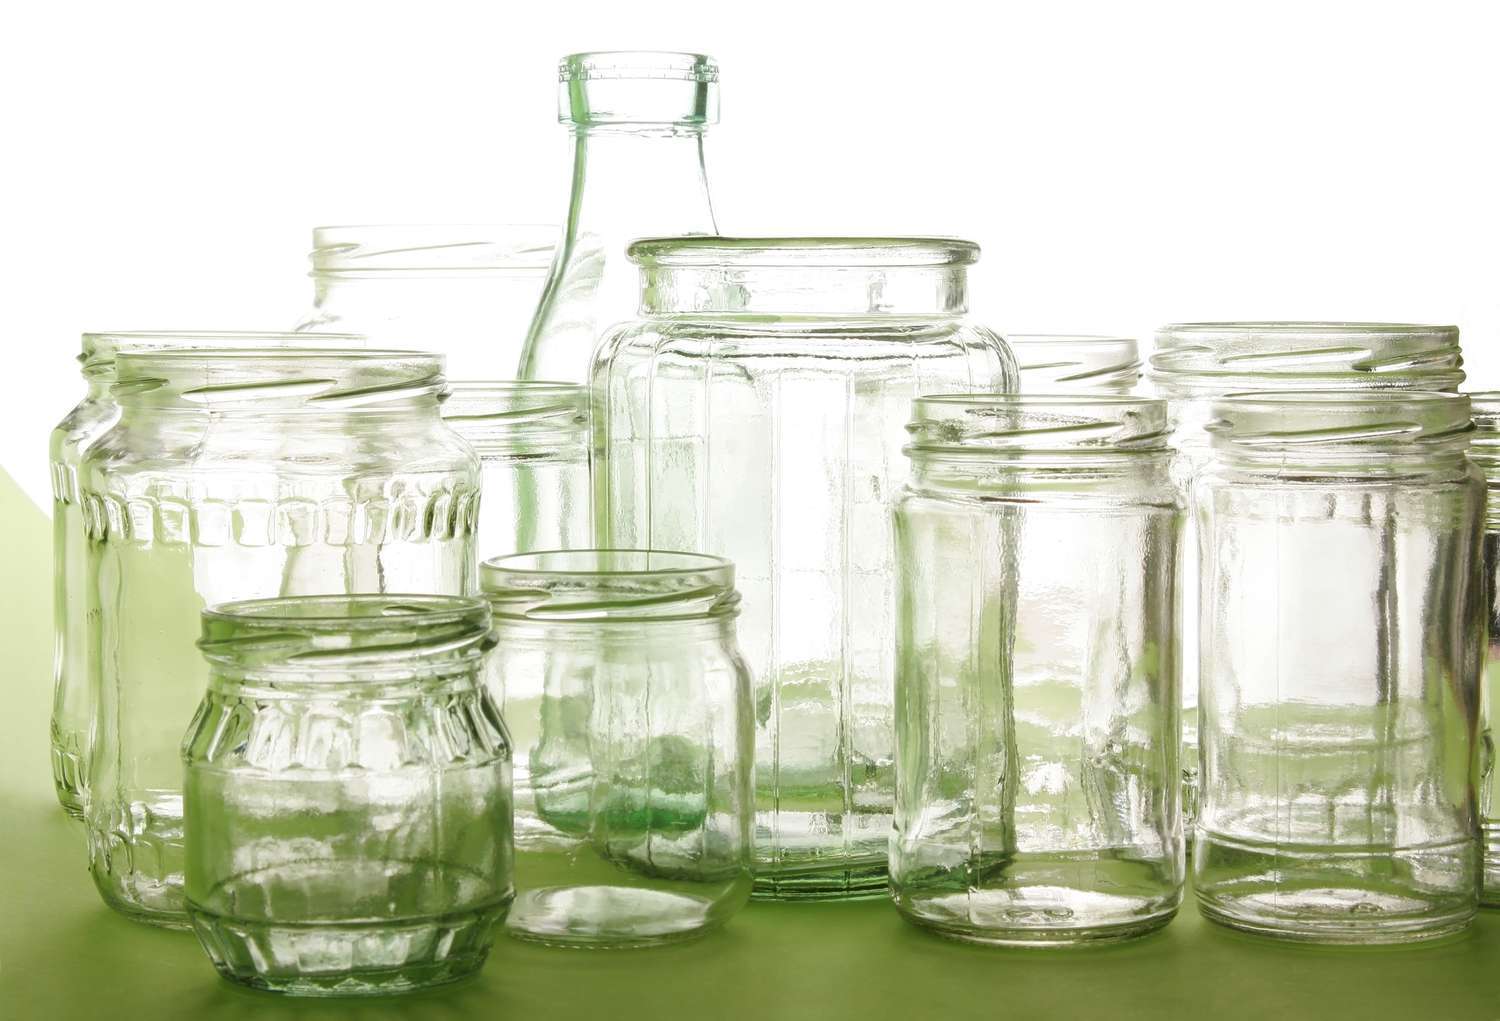 How To Dispose Of Glass Vases